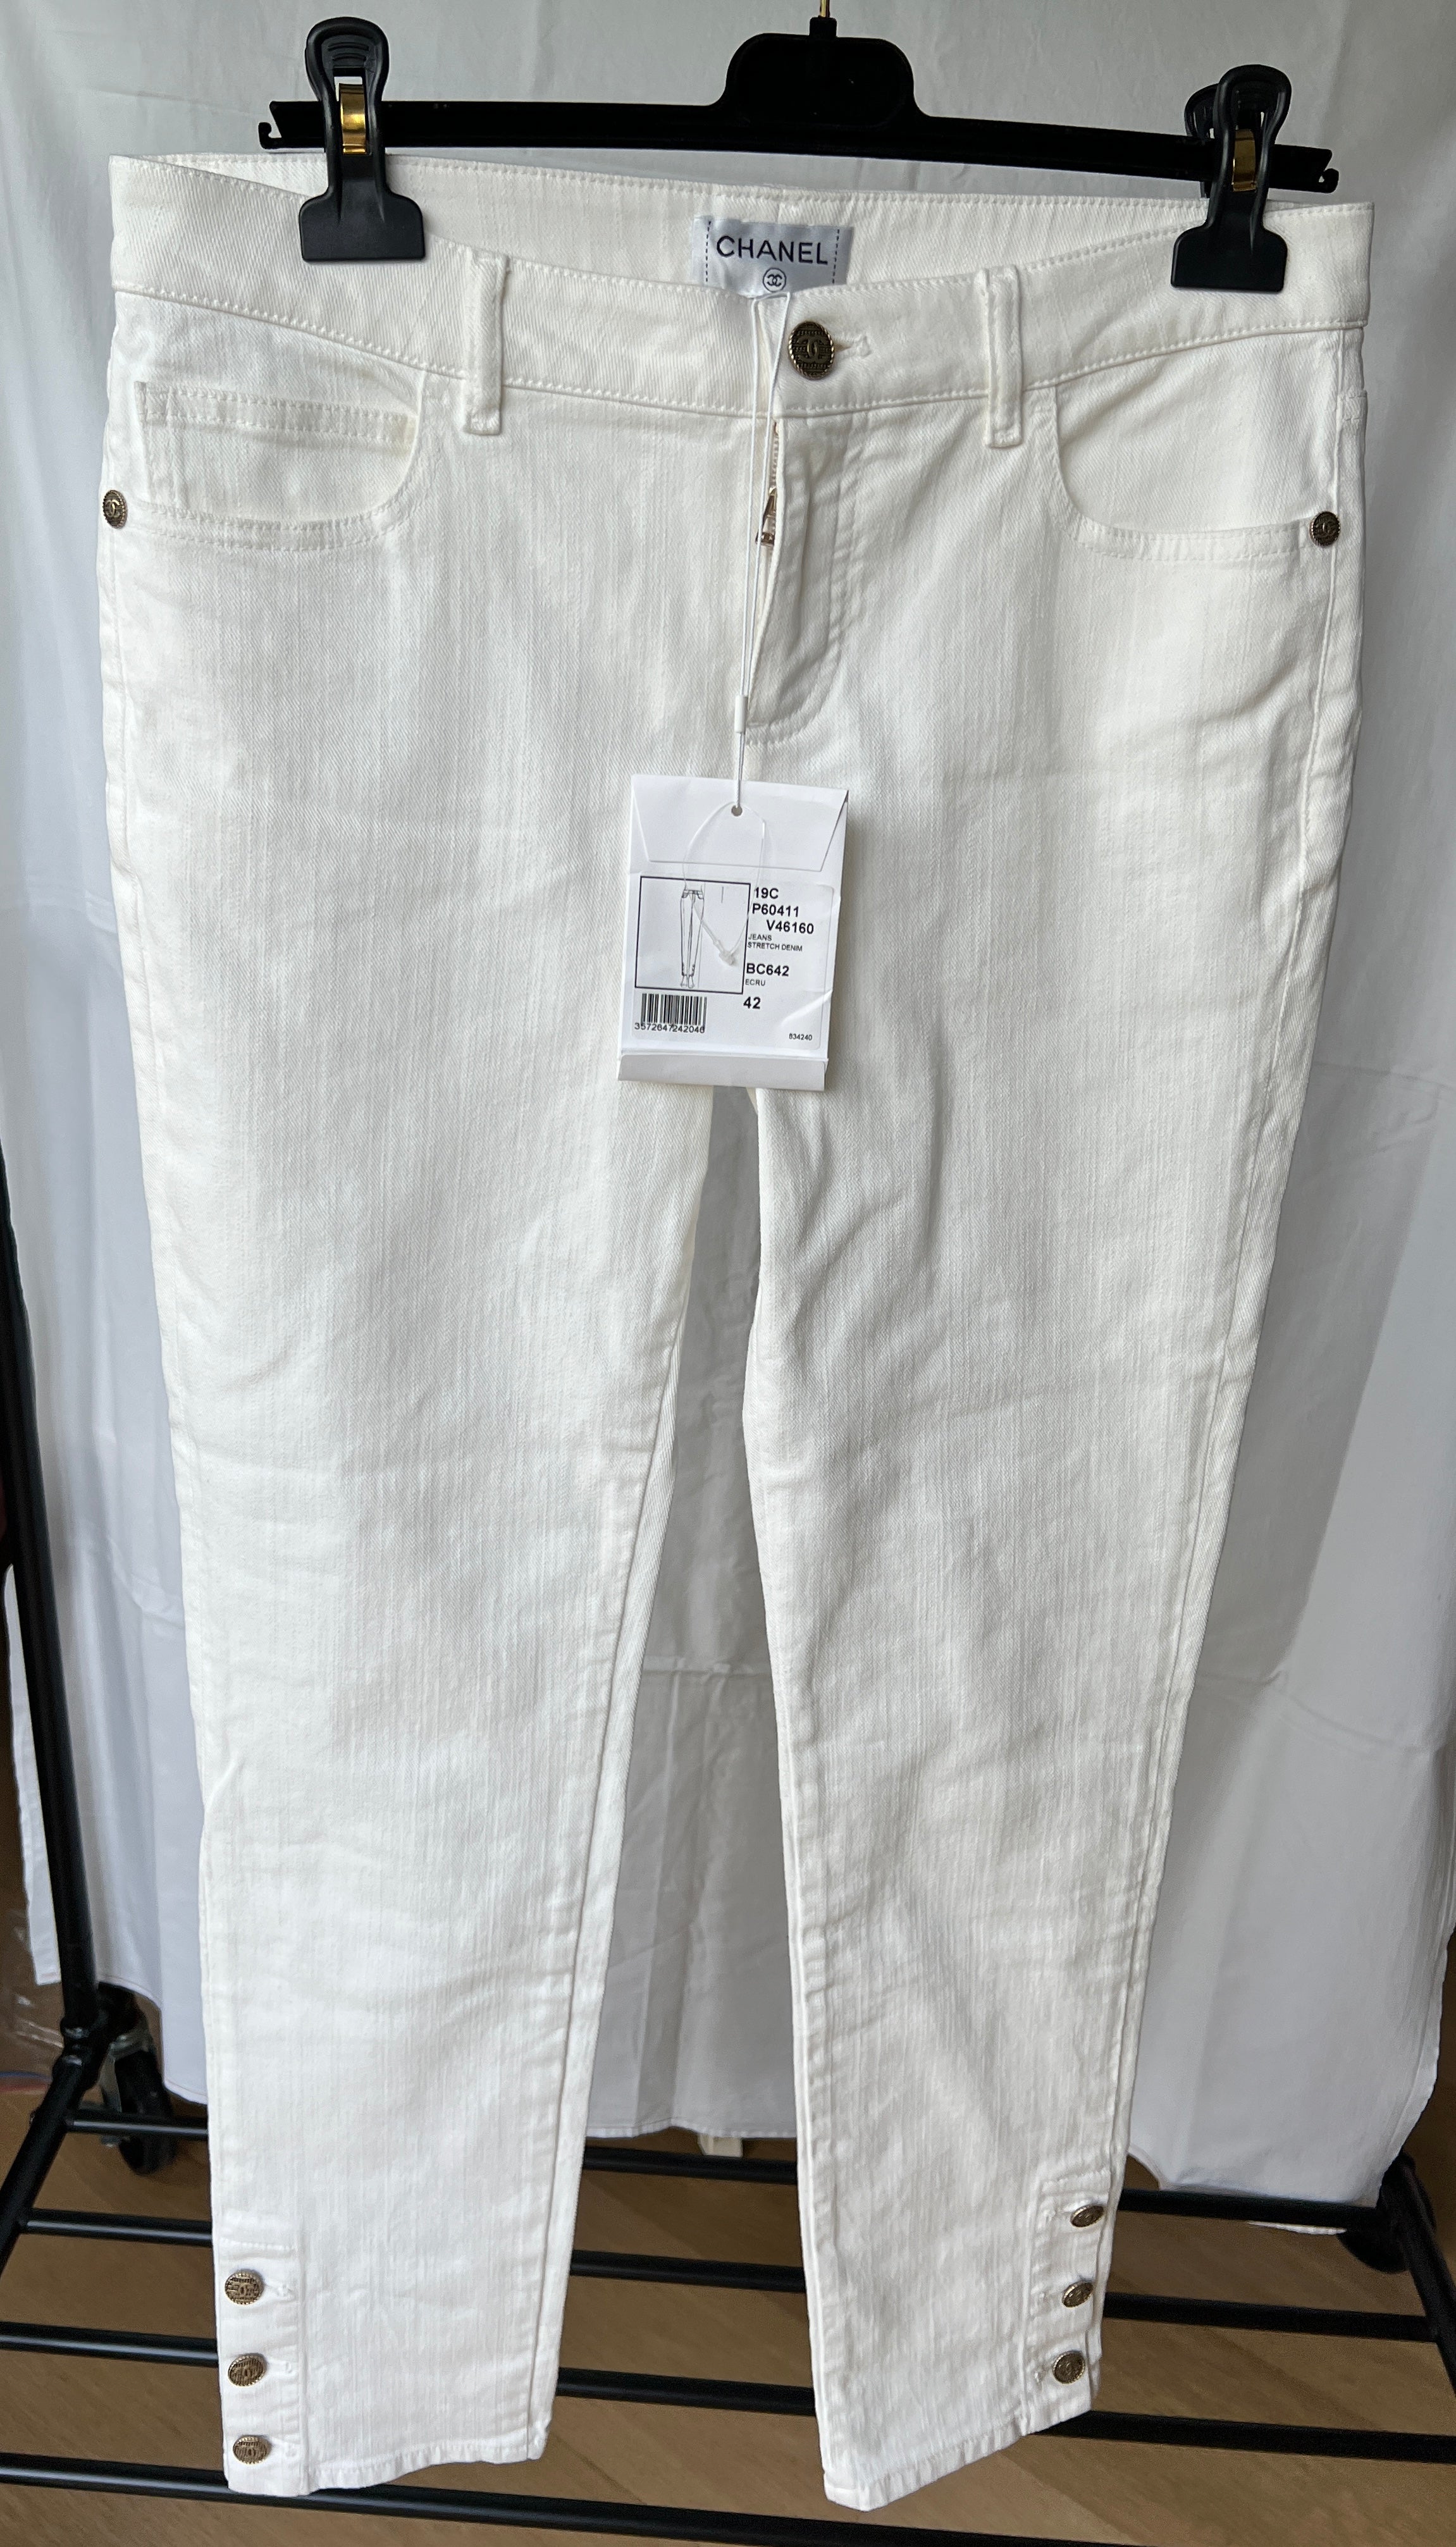 Chanel White Jeans in Size 42